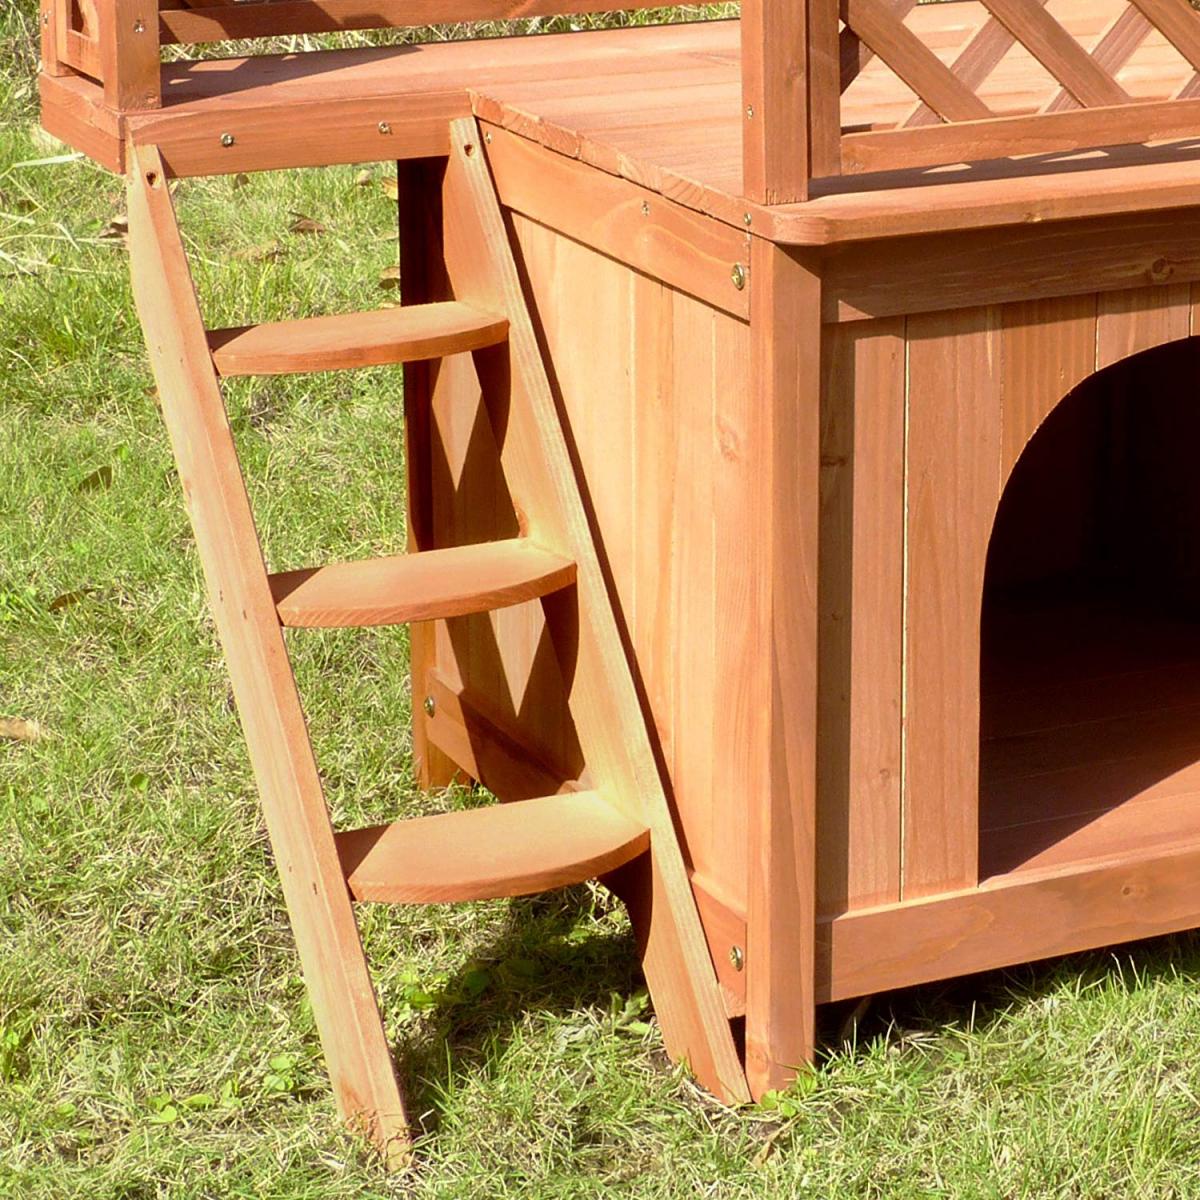 Wooden Dog Bed Bunk Bed - Wooden Room With a View Pet House